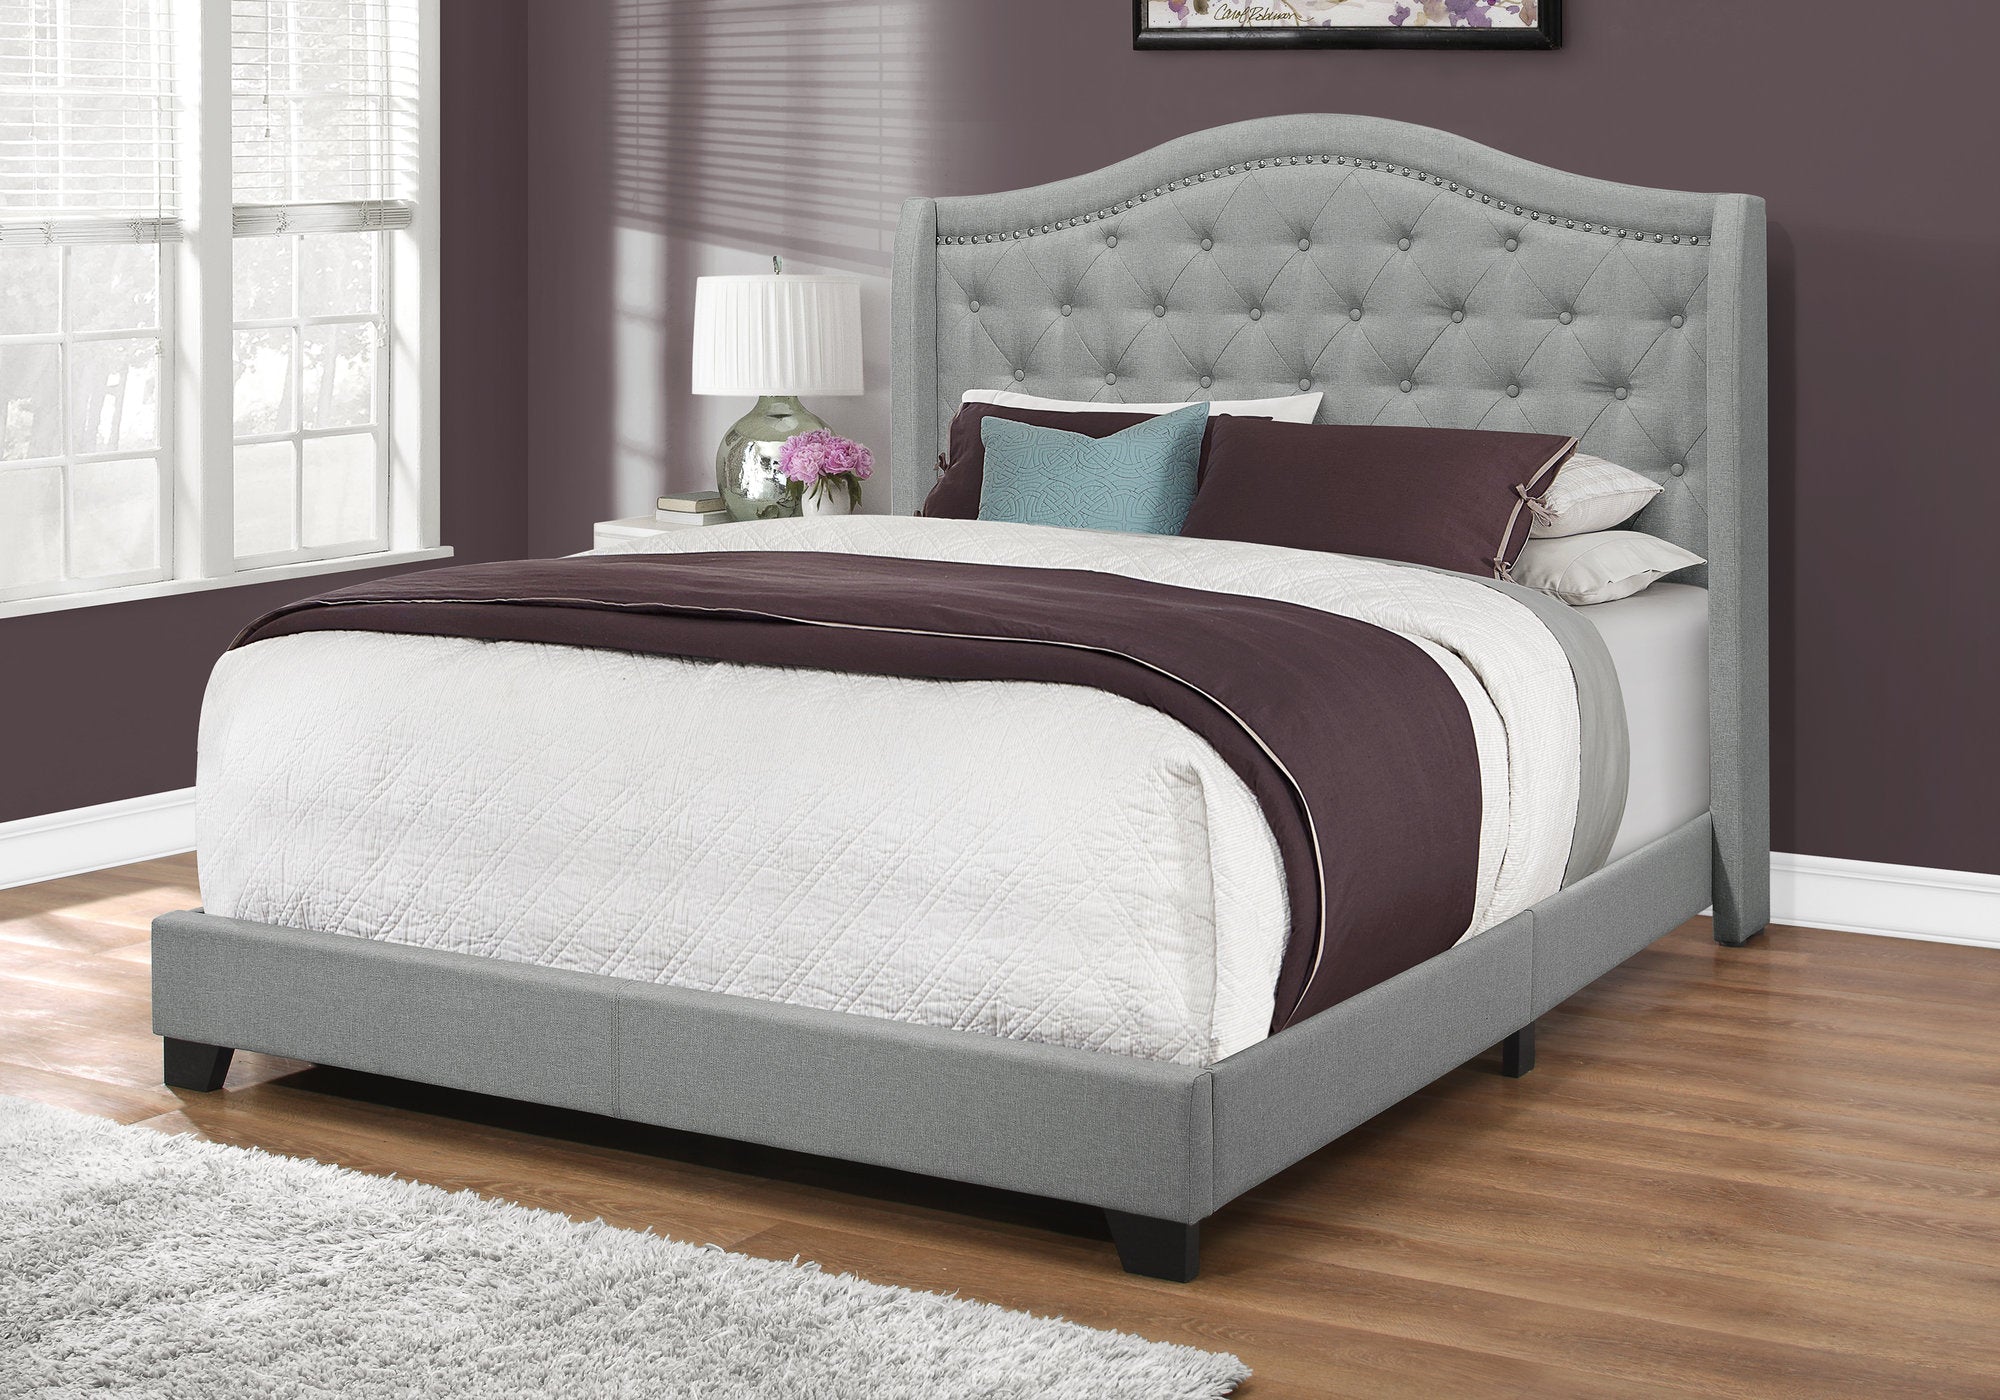 bed queen size grey linen with chrome trim i5966q